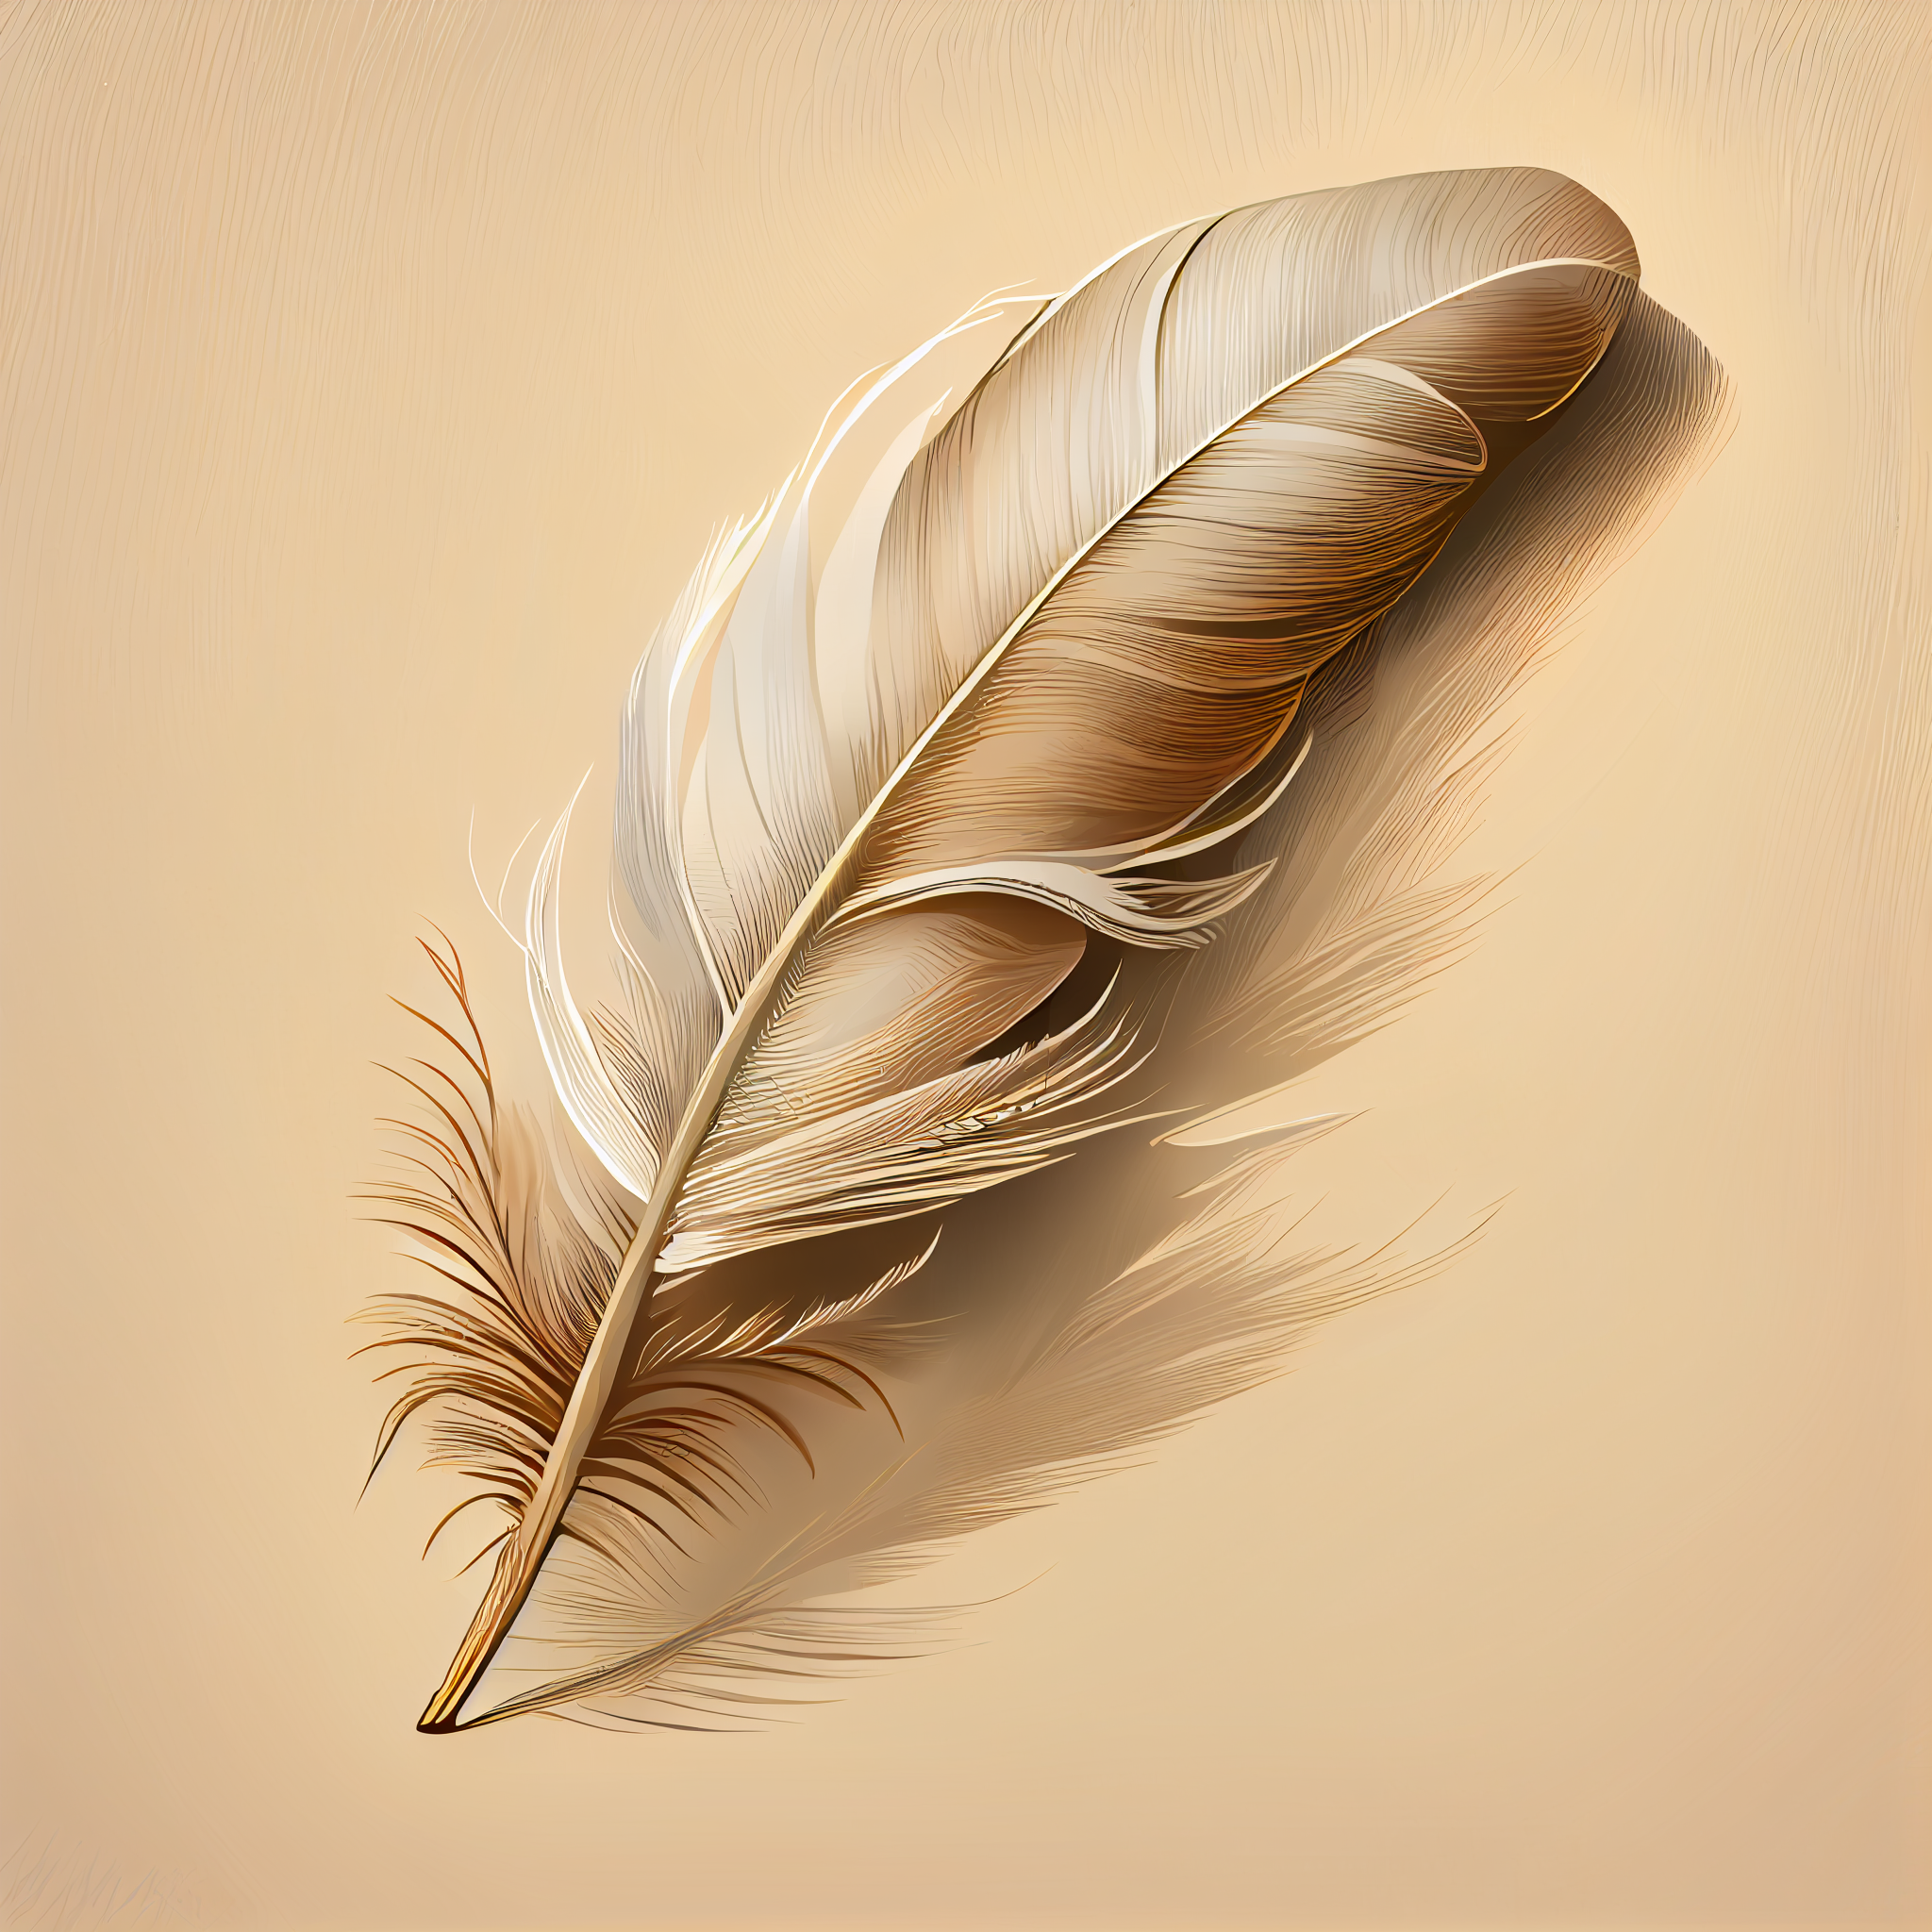 Graceful Feathers: A Stunning Oil Color Print of an Off-White Feather on a Chic Beige Background